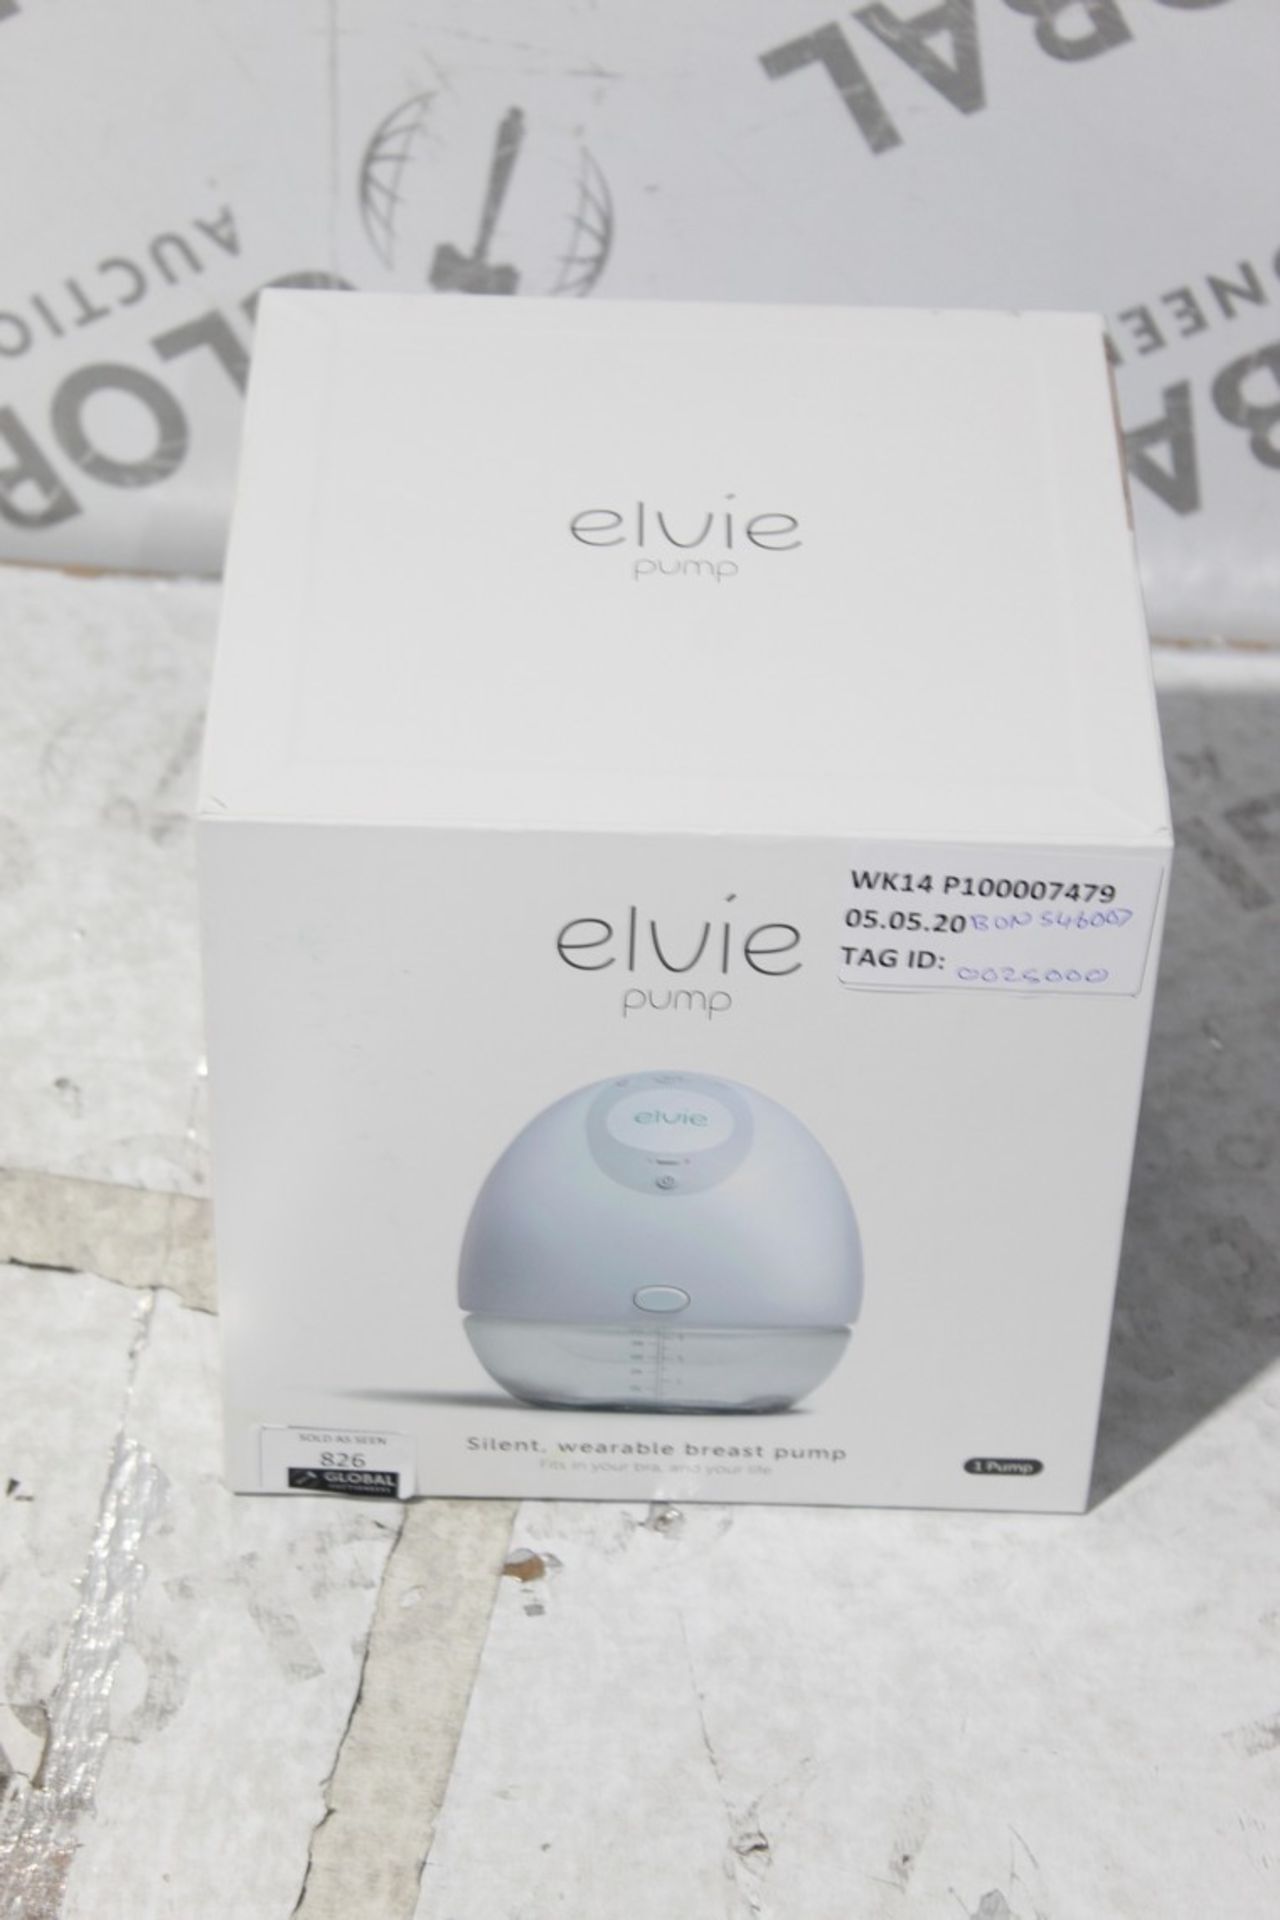 Elvie Pump Silent Wear Breast Pump RRP £250 (BUN546007) (Pictures Are For Illustration Purposes